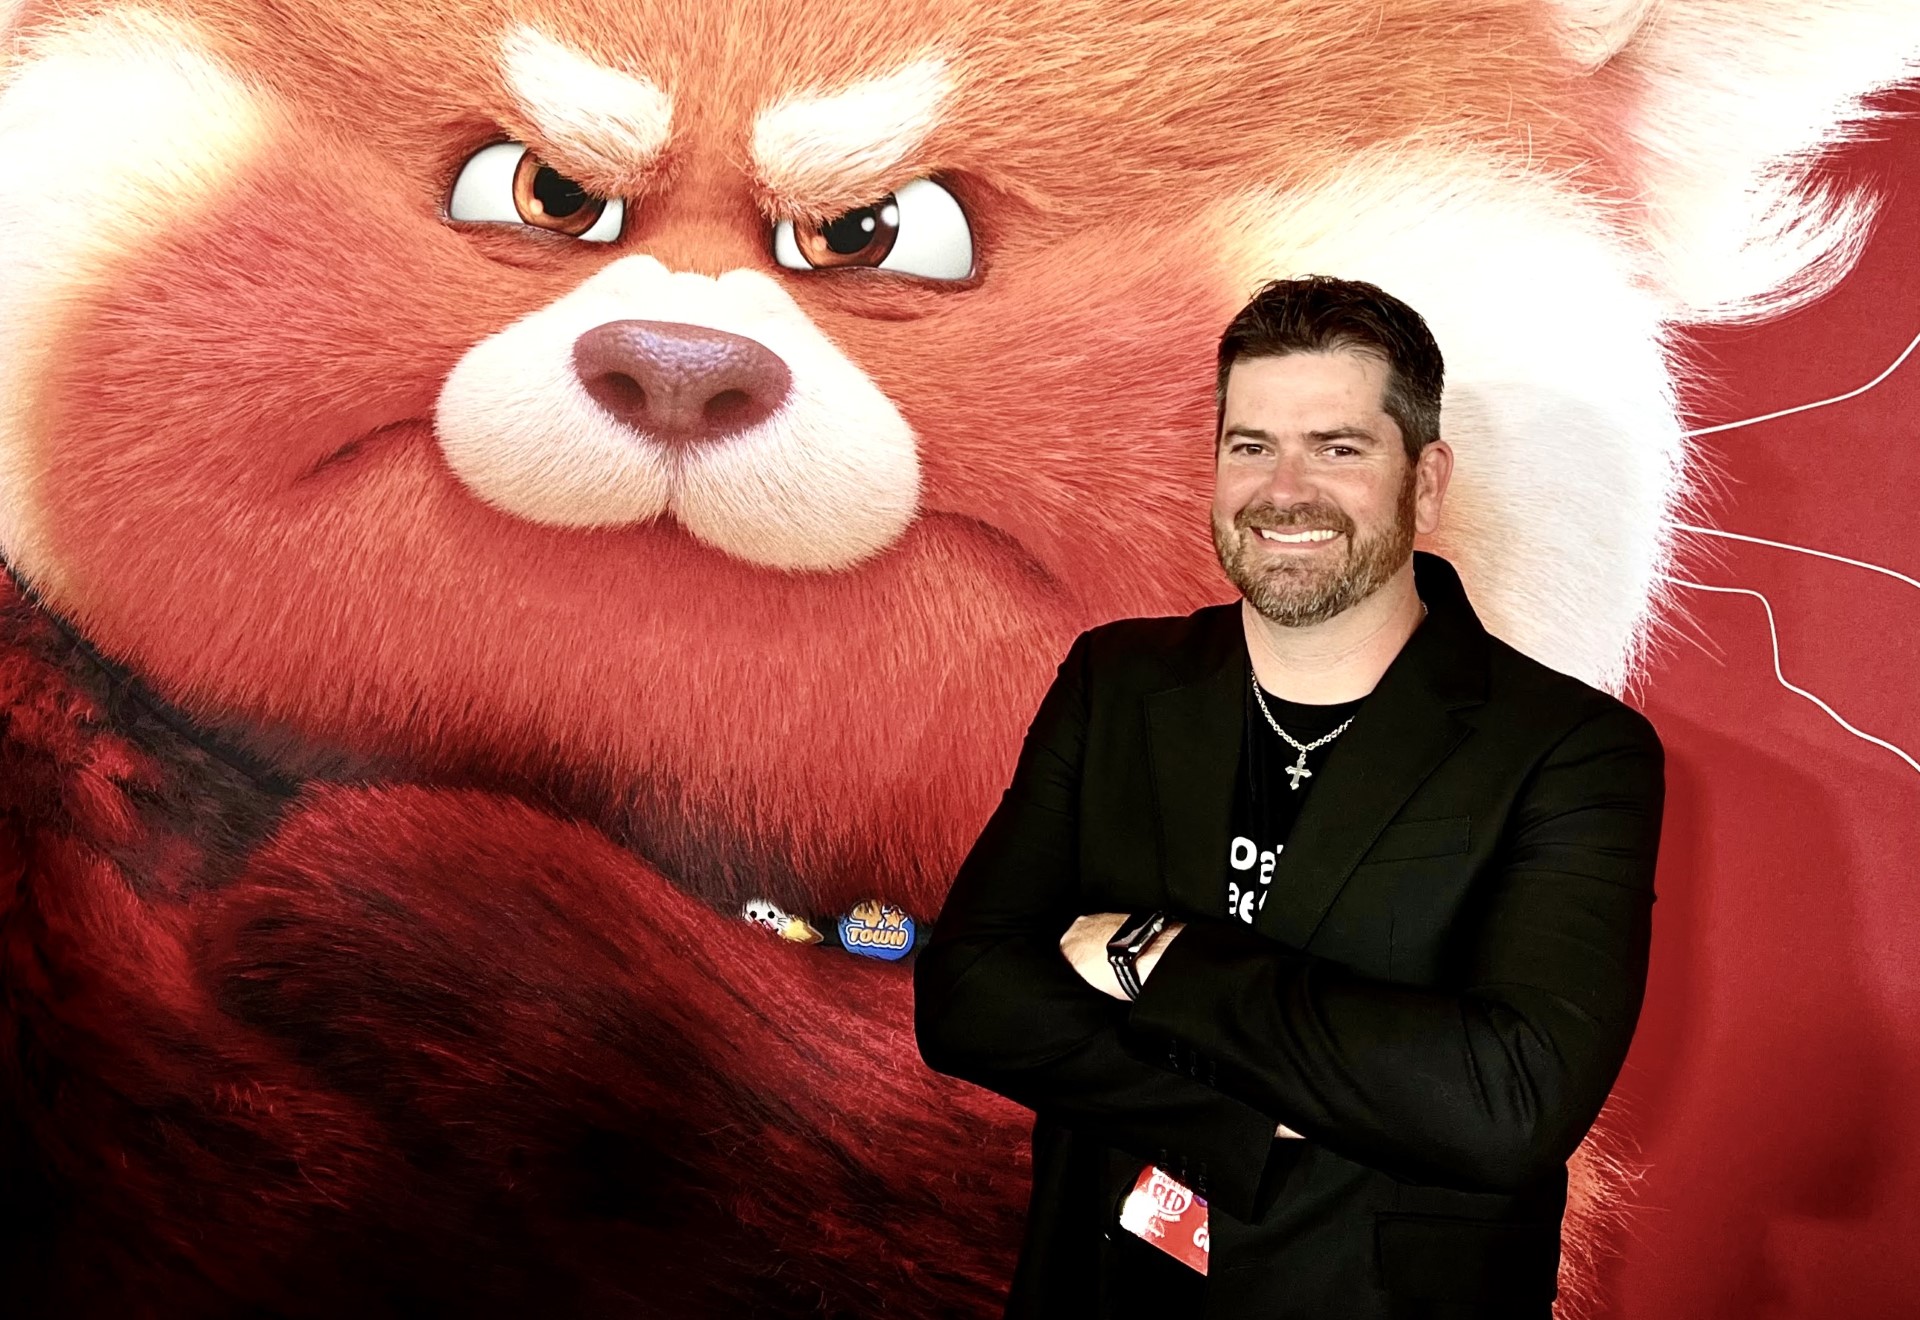 Jacob Brooks smiling in front of a still from Pixar's Red Panda.